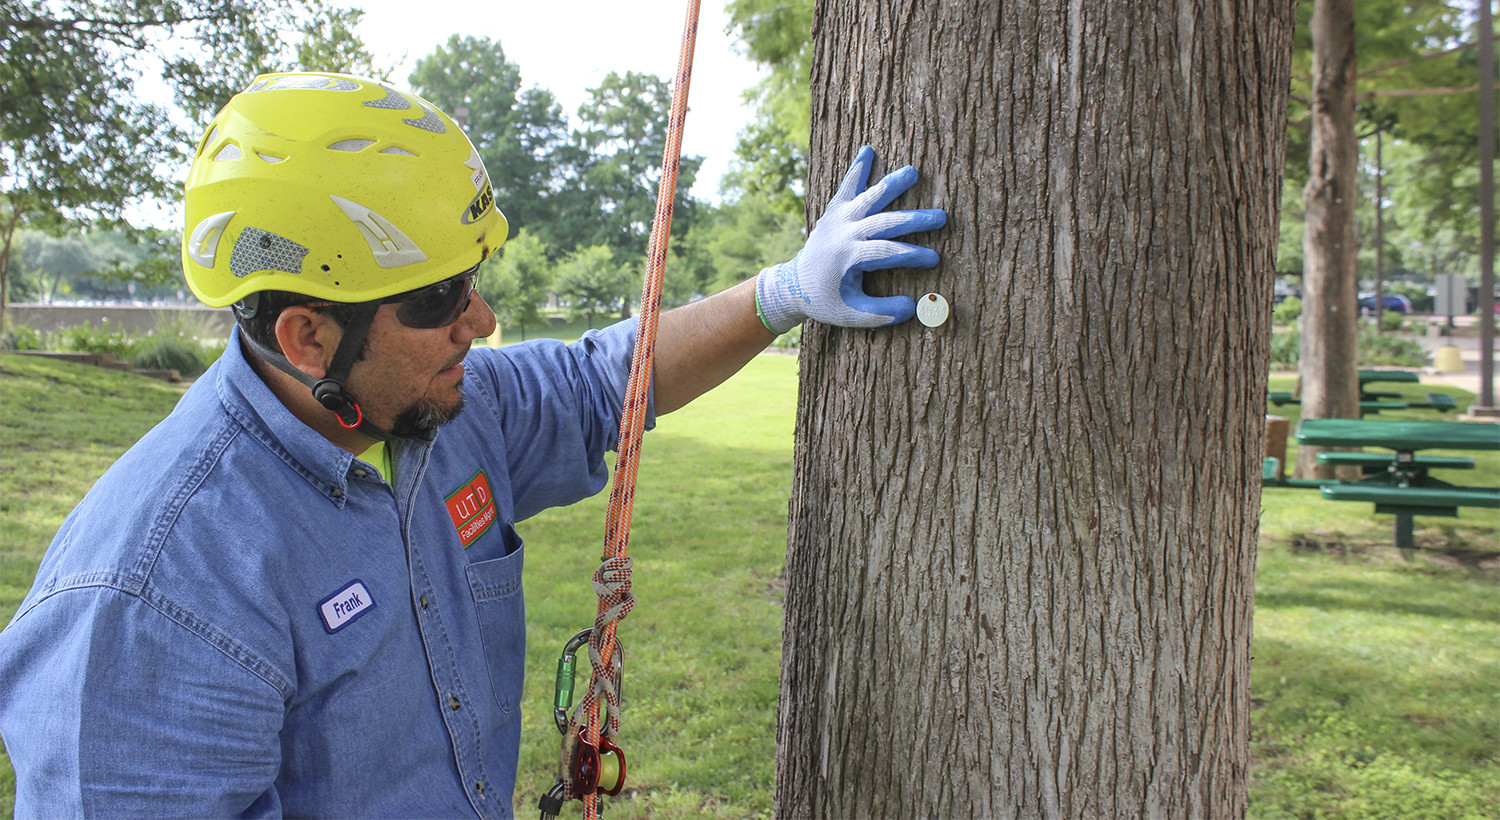 The tree tags, costing $7 each, assign each tree a specific GPS location and number. This way, Facilities Management can easily track which trees need maintenance. Marking the trees was the first part of a multi-step process to gain entry into Tree Campus USA, an organization that recognizes green campuses. Photo by Andrew Gallegos | Photo Editor.